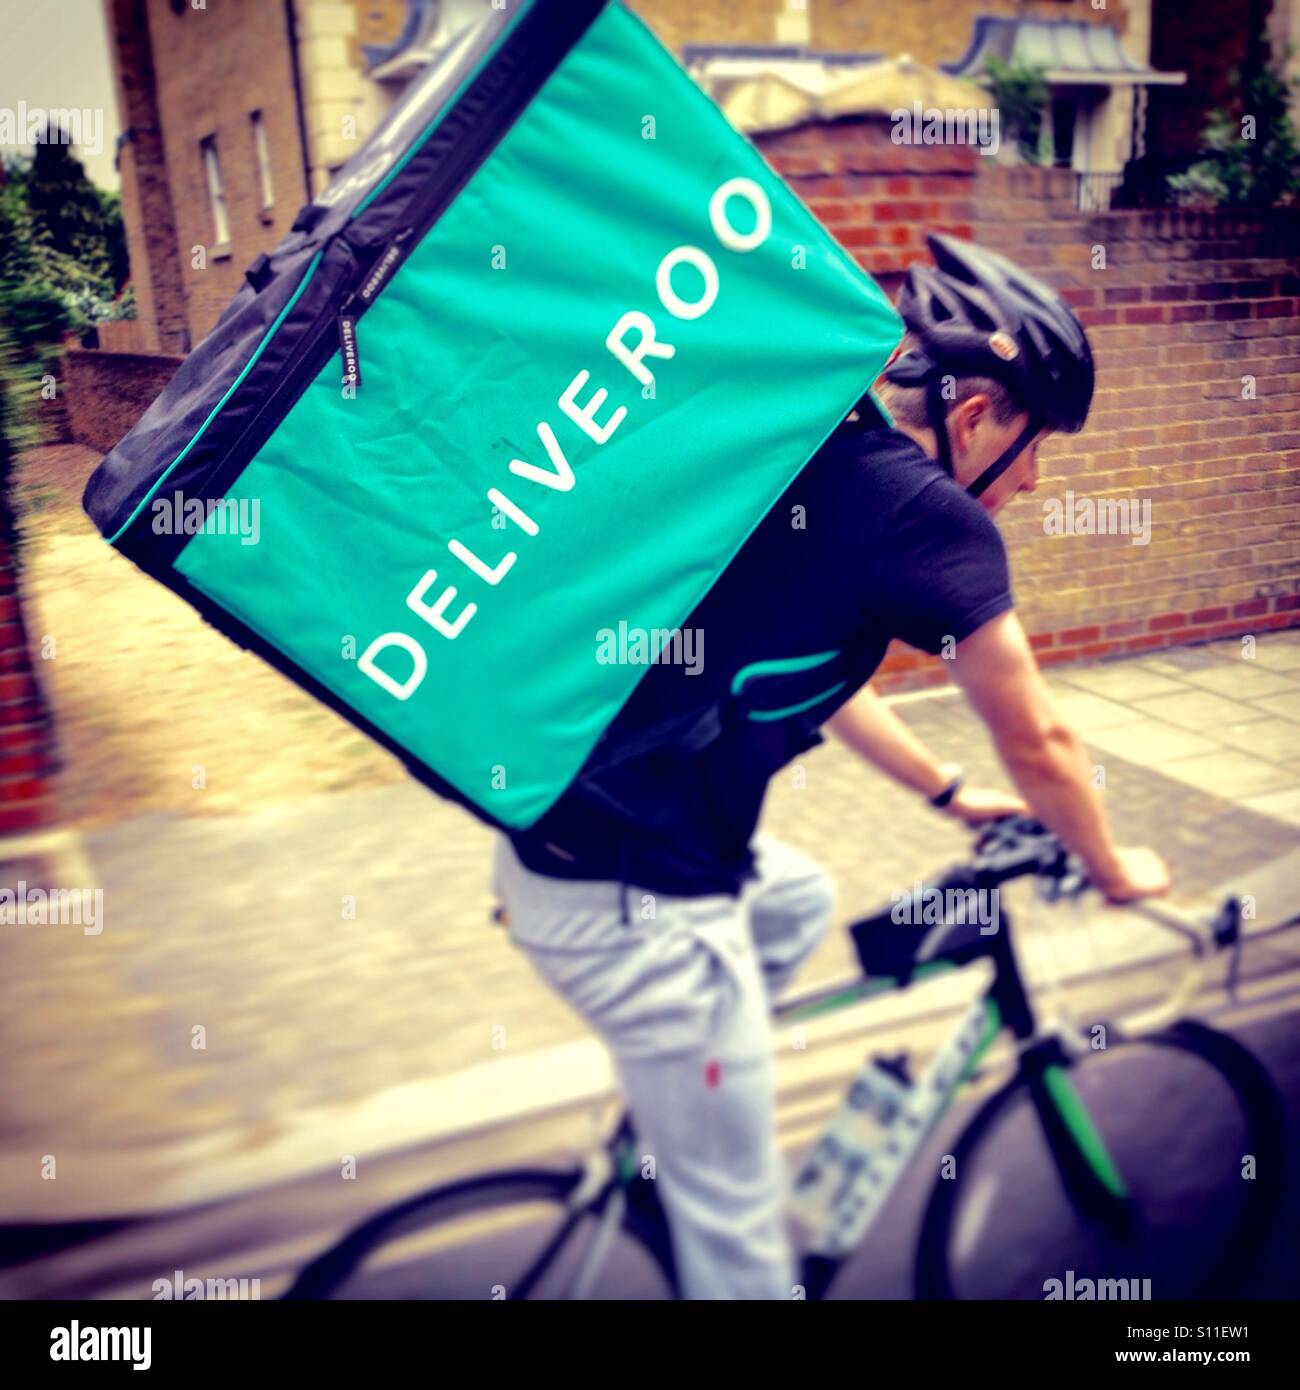 Deliveroo takeaway food delivery Courier pedal cycle / push bike cyclist making a delivery run in Richmond upon Thames. U.K. Stock Photo